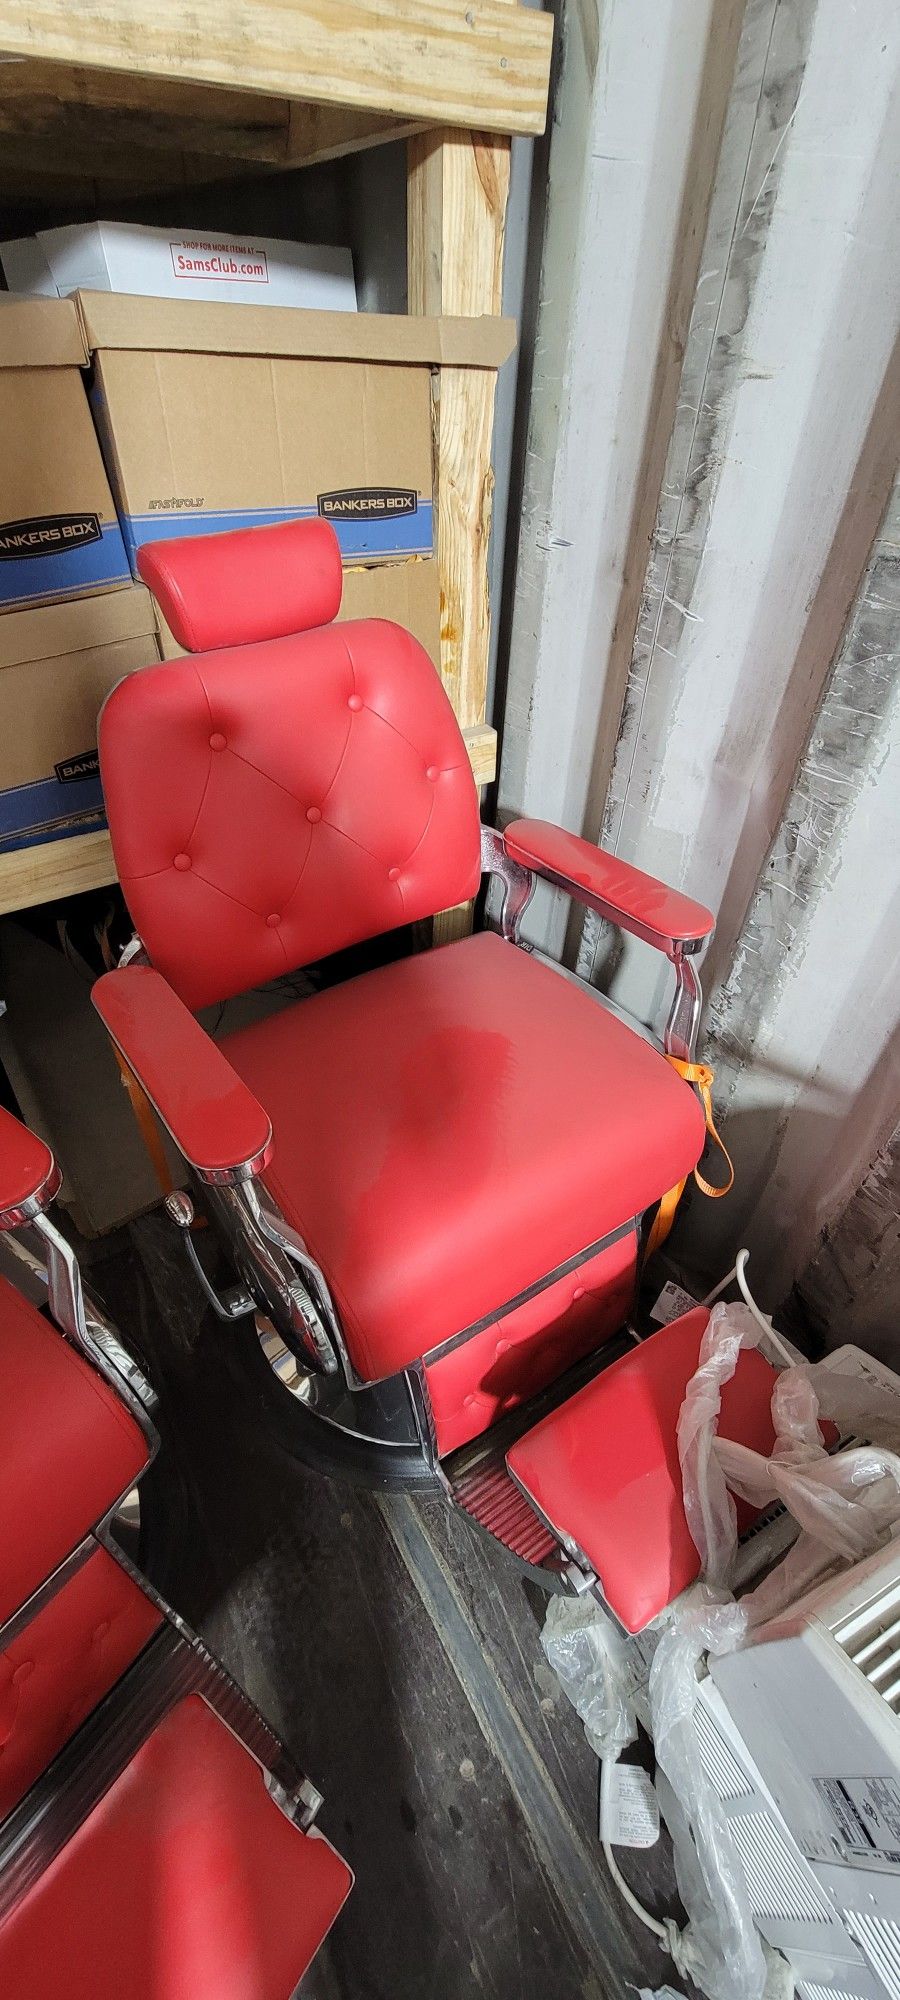 Titan 2022 Barber Chair (red)

